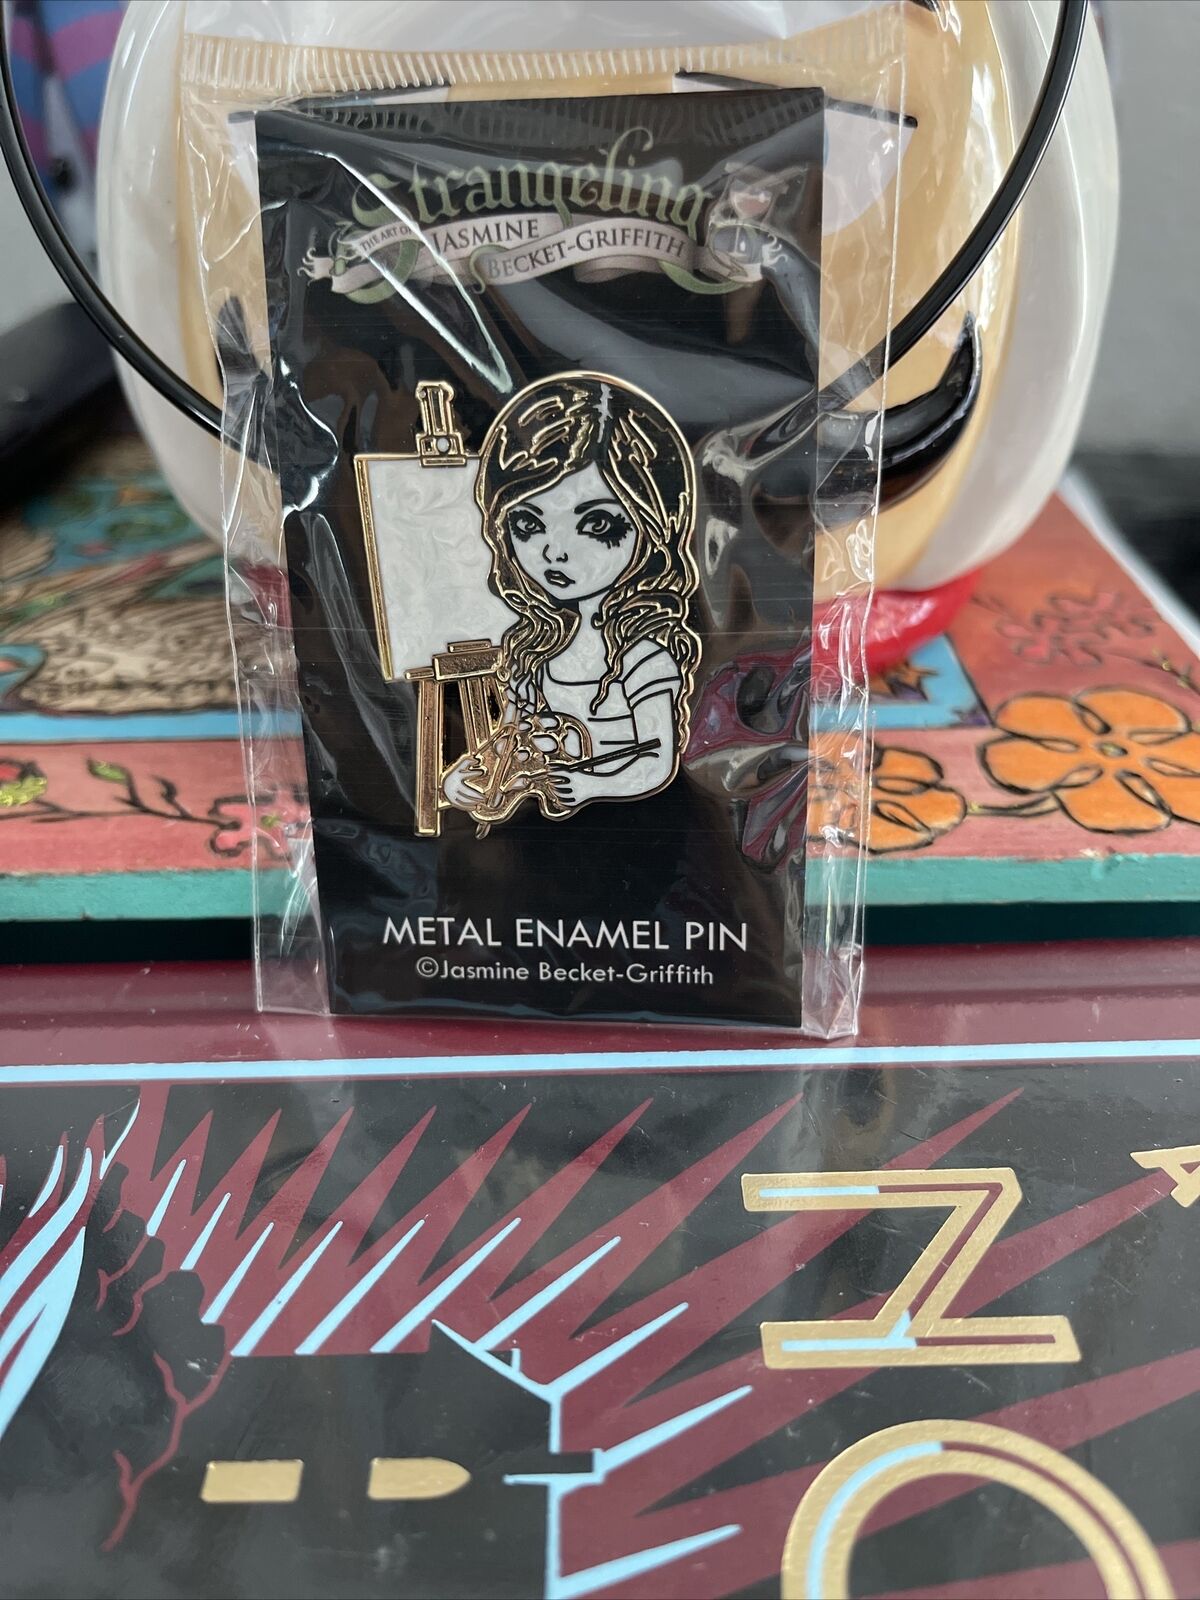 jasmine becket griffith pin